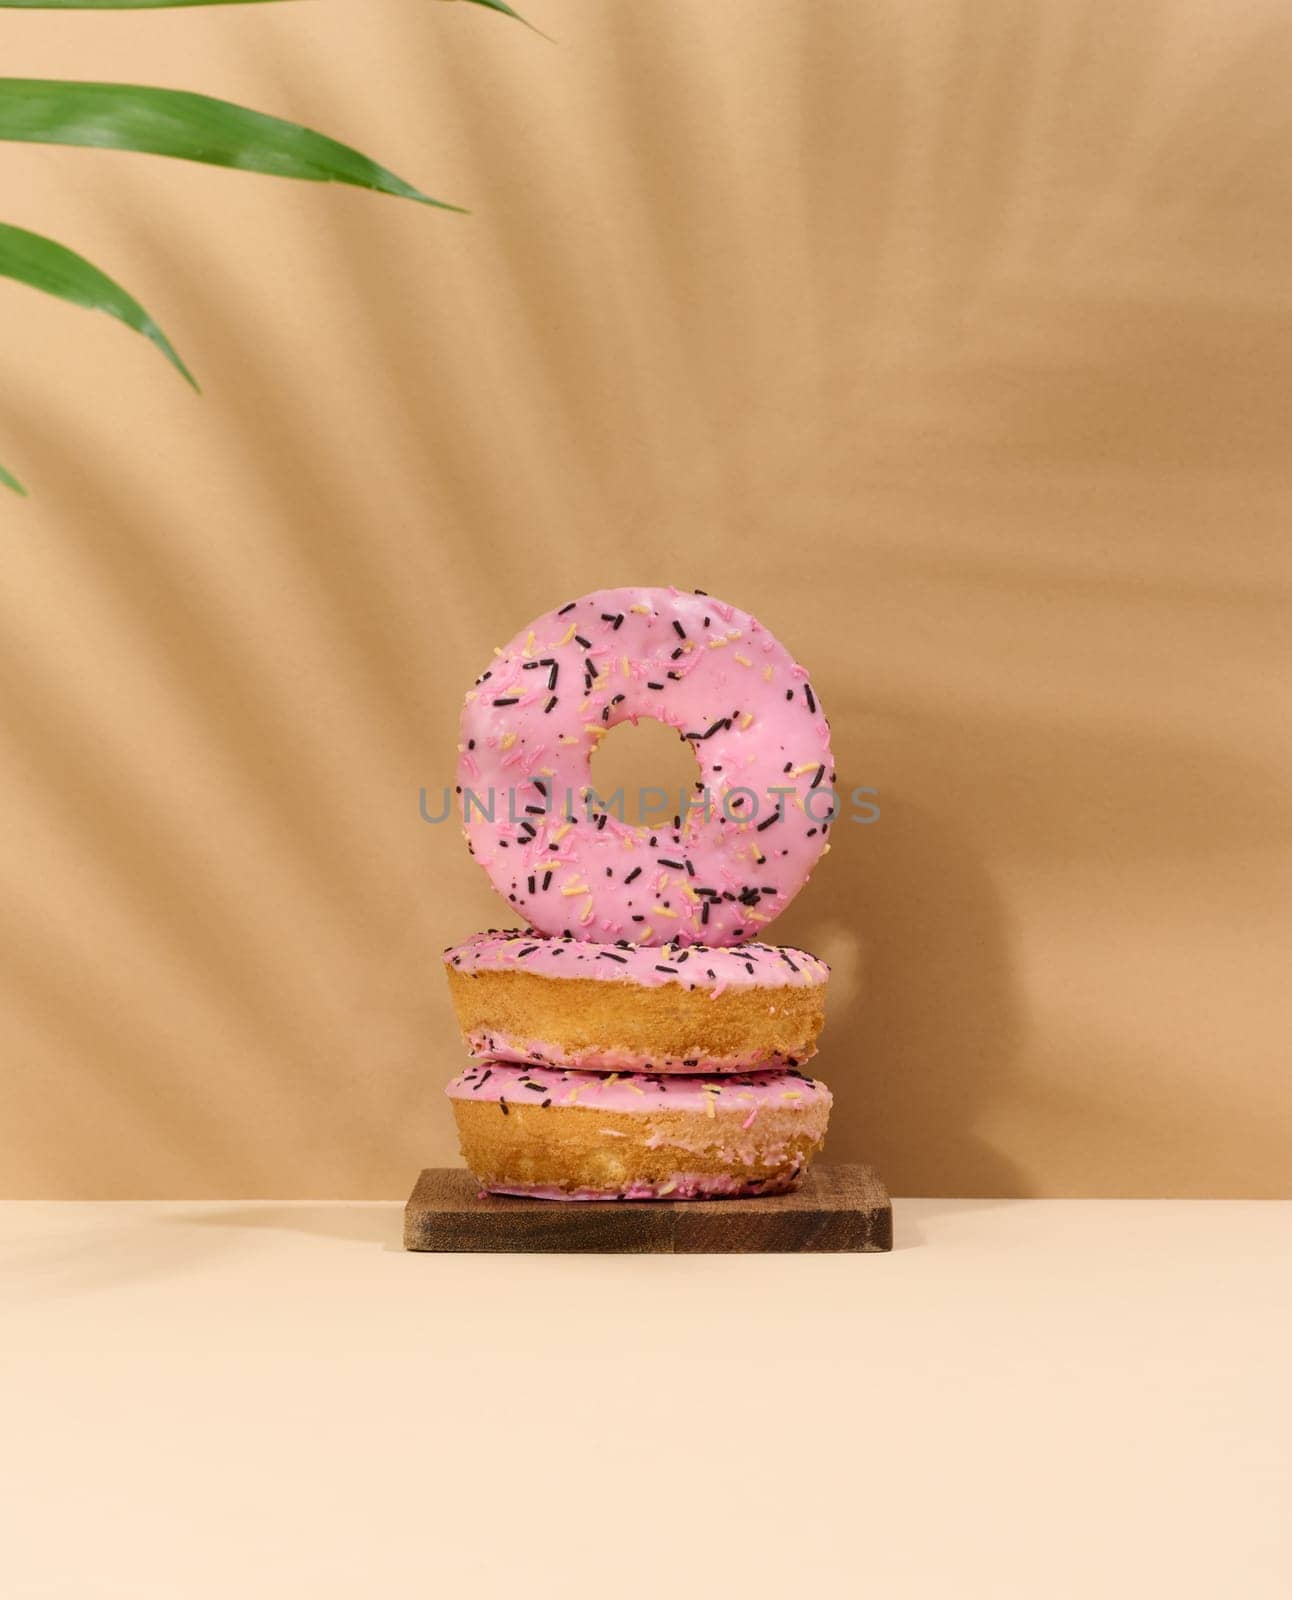 Donut covered with pink glaze and sprinkled with multi-colored sprinkles, brown background with a shadow from a palm leaf